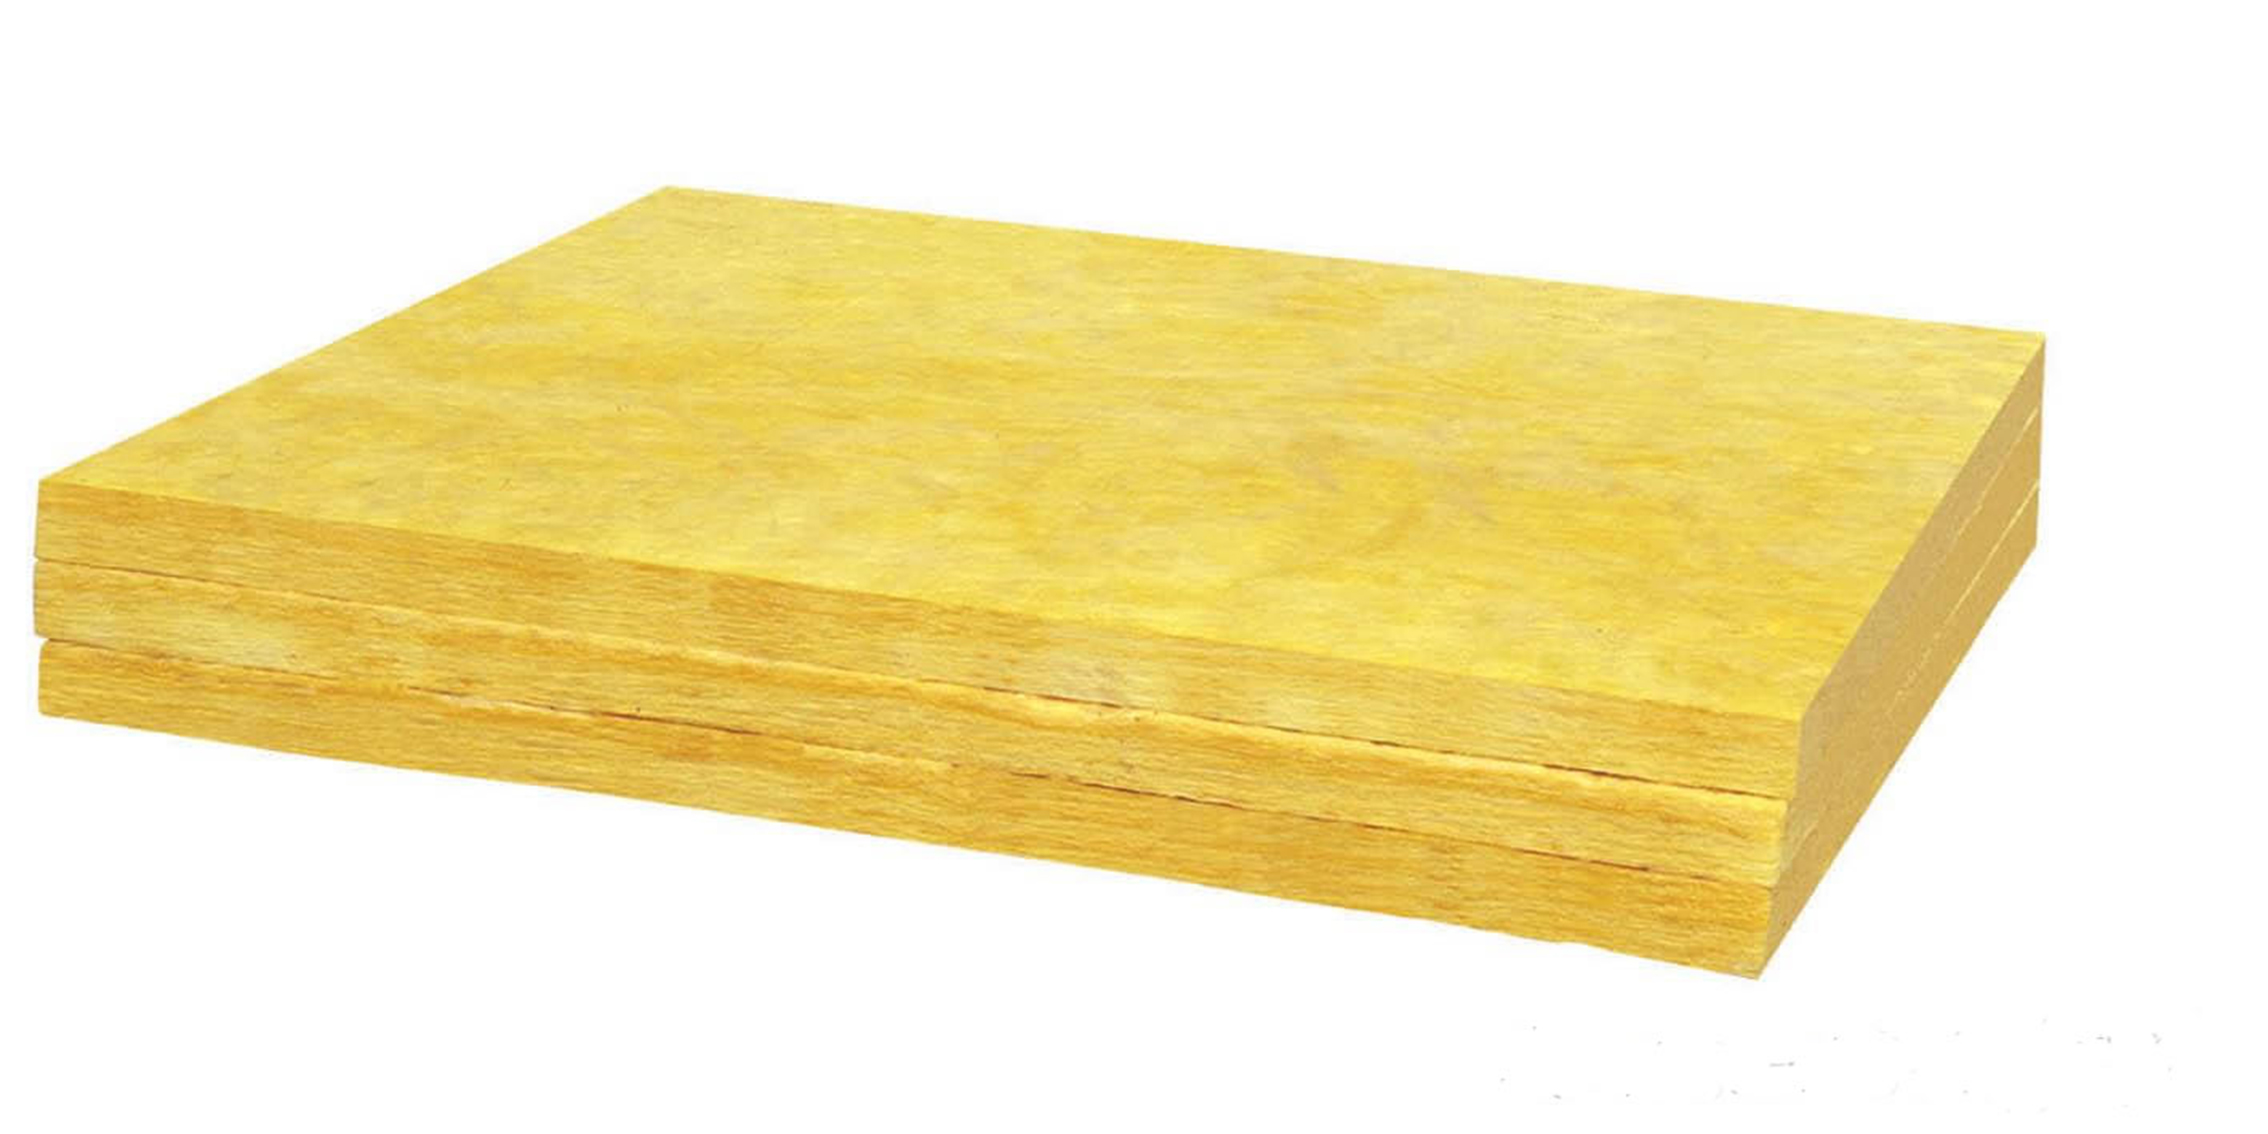 Glass wool insulation material